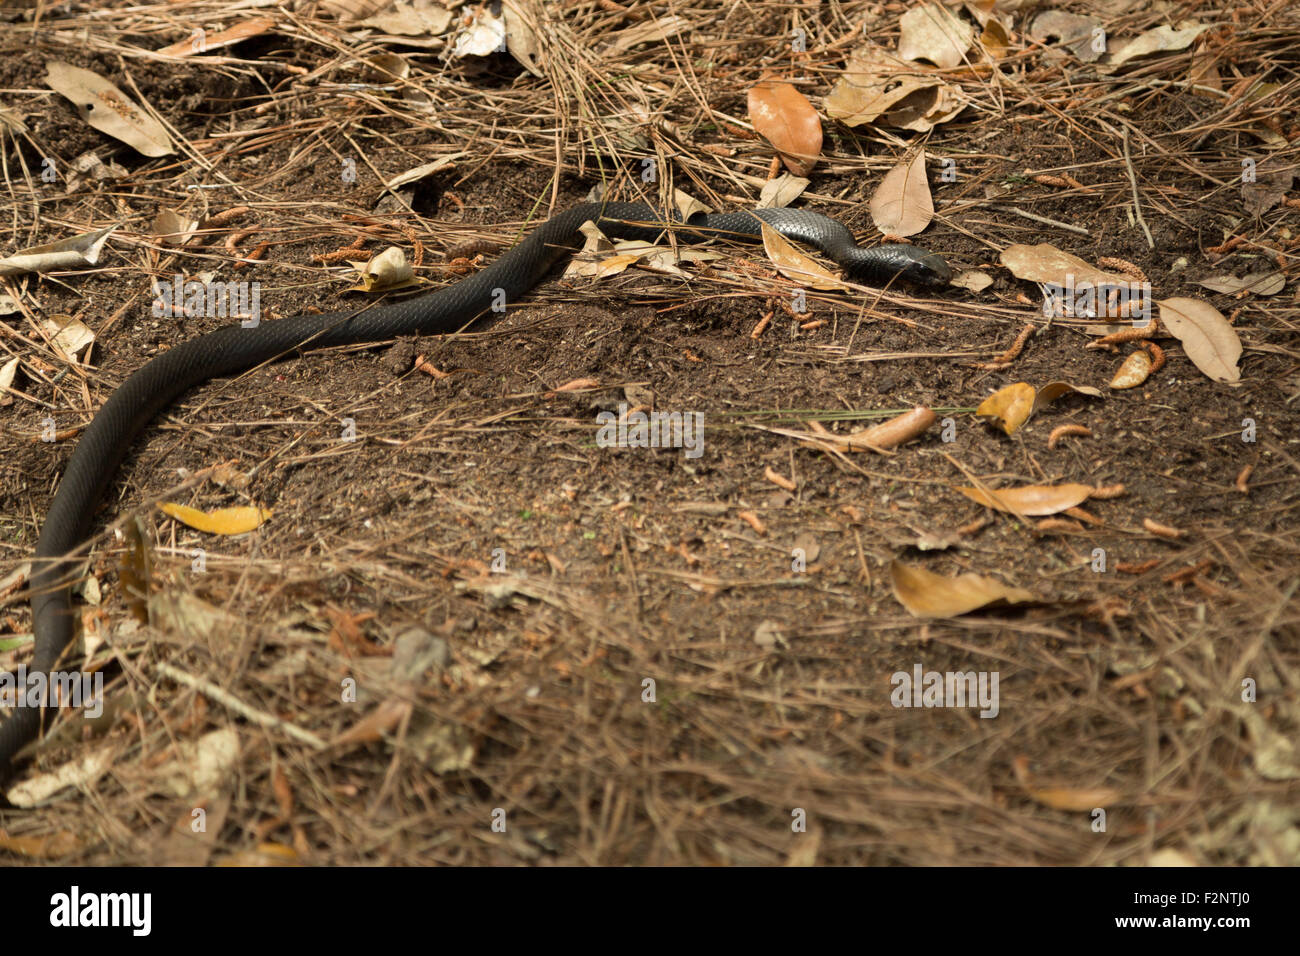 A photograph of black coachwhip snake, which was spotted near Savannah in Georgia, USA. Stock Photo